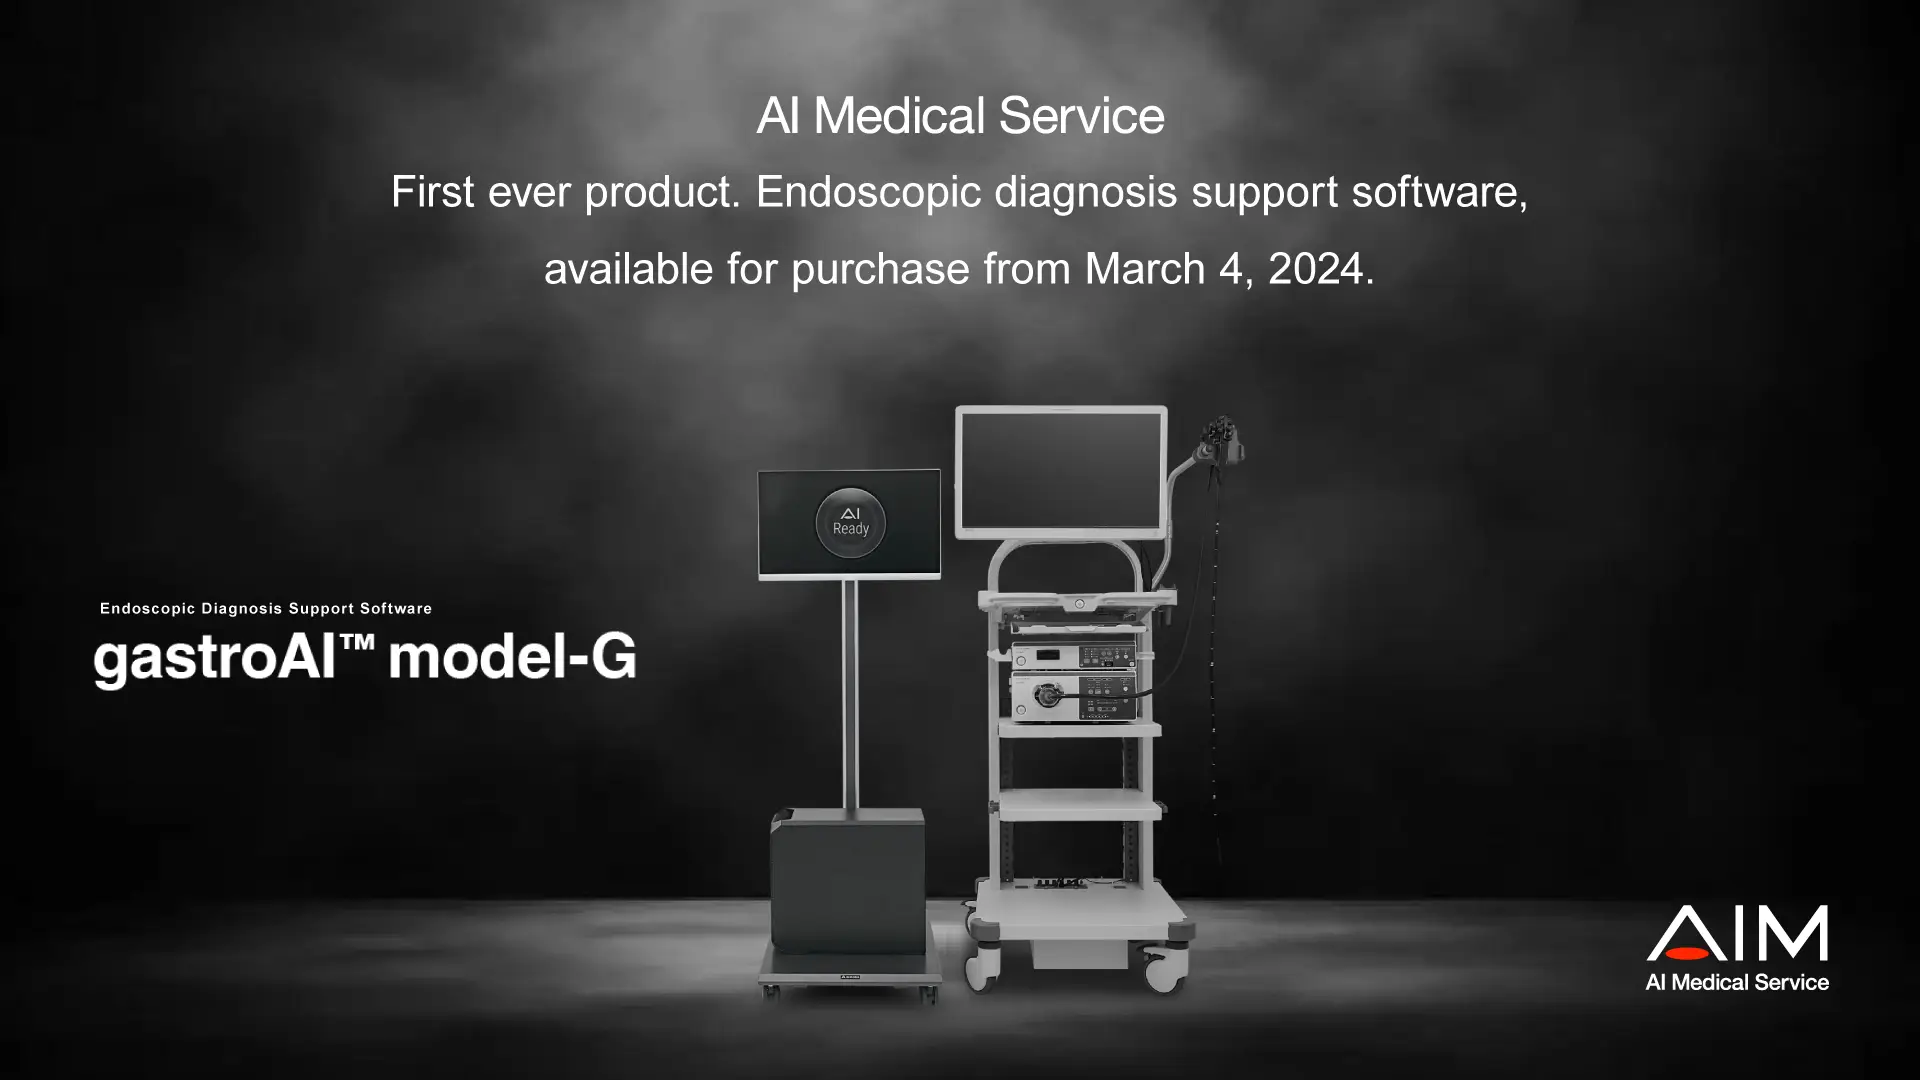 AI Medical Service Inc. Announces Release of Gastric AI-based Endoscopic Diagnosis Support System